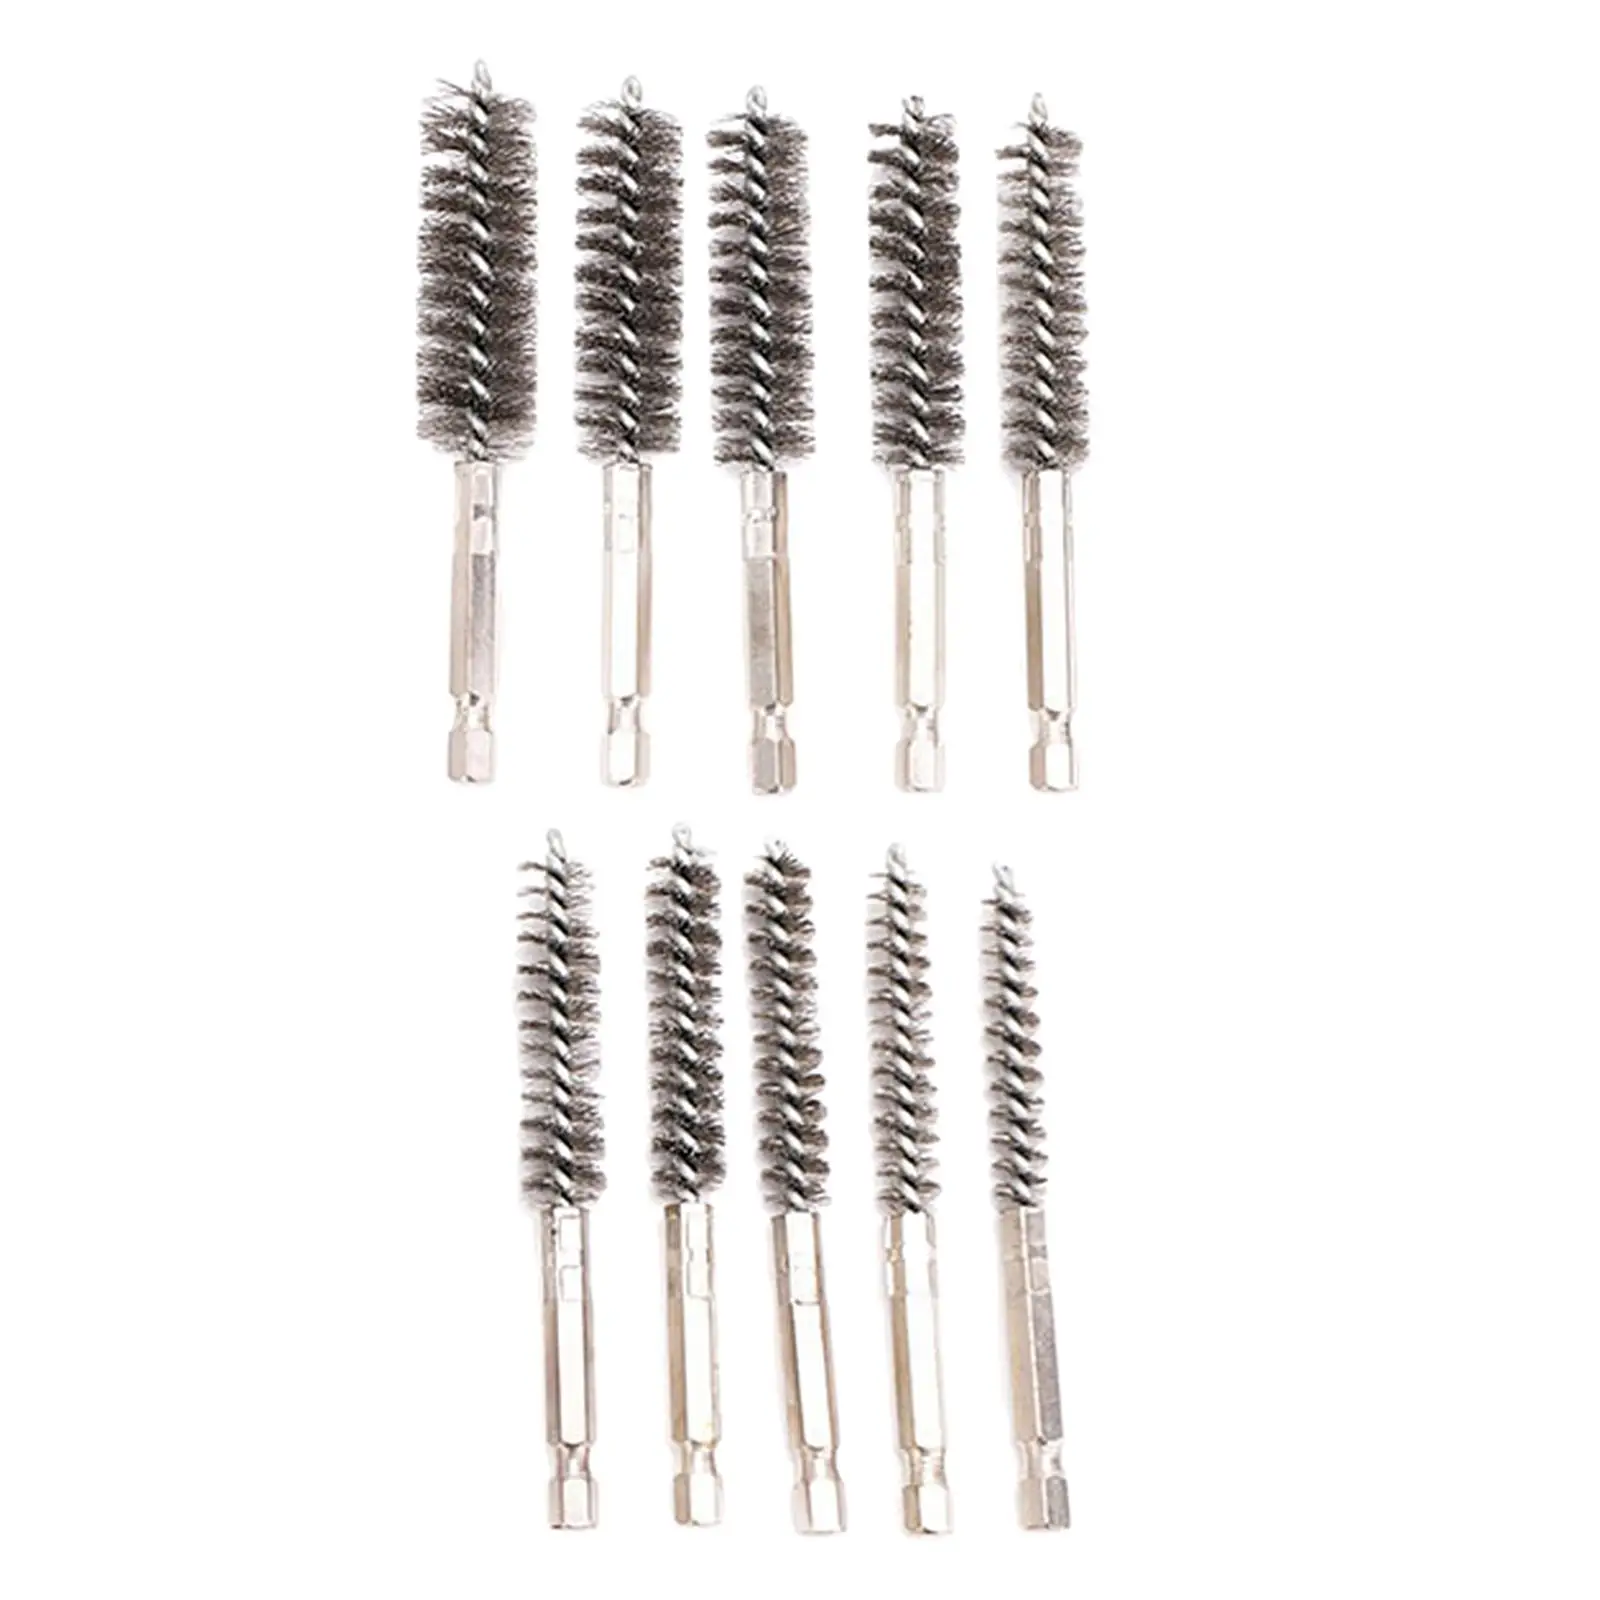 10 Pieces Bore Cleaning Brush Rust Cleaner Assorted bits Brush for Machining Fabrication Cleaning Ports Automotive